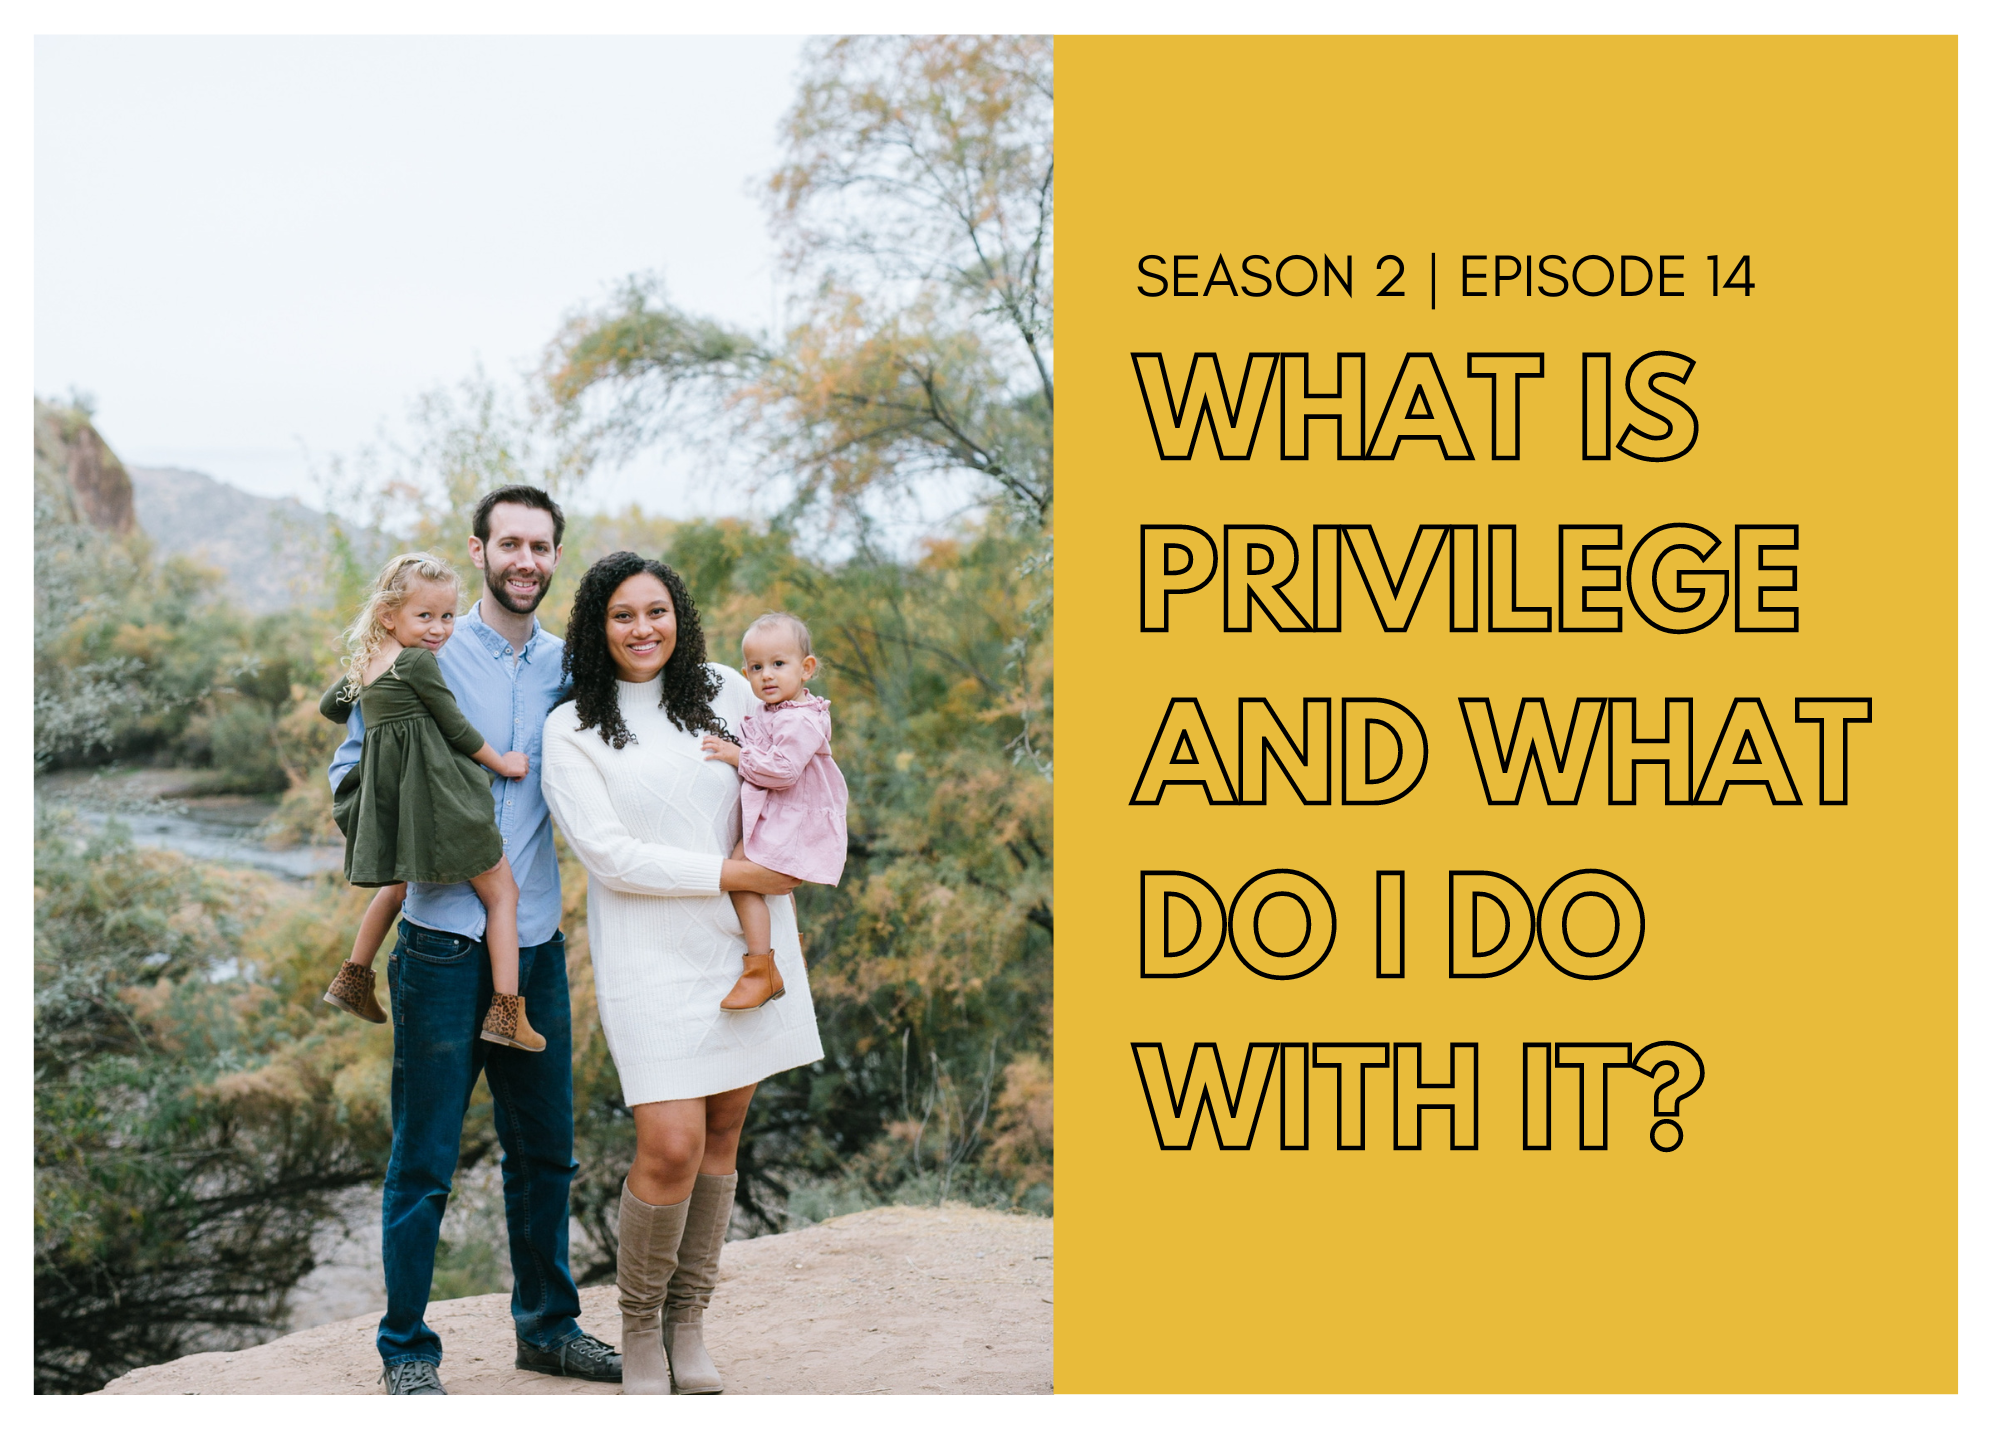 What Is Privilege And What Do I Do With It?